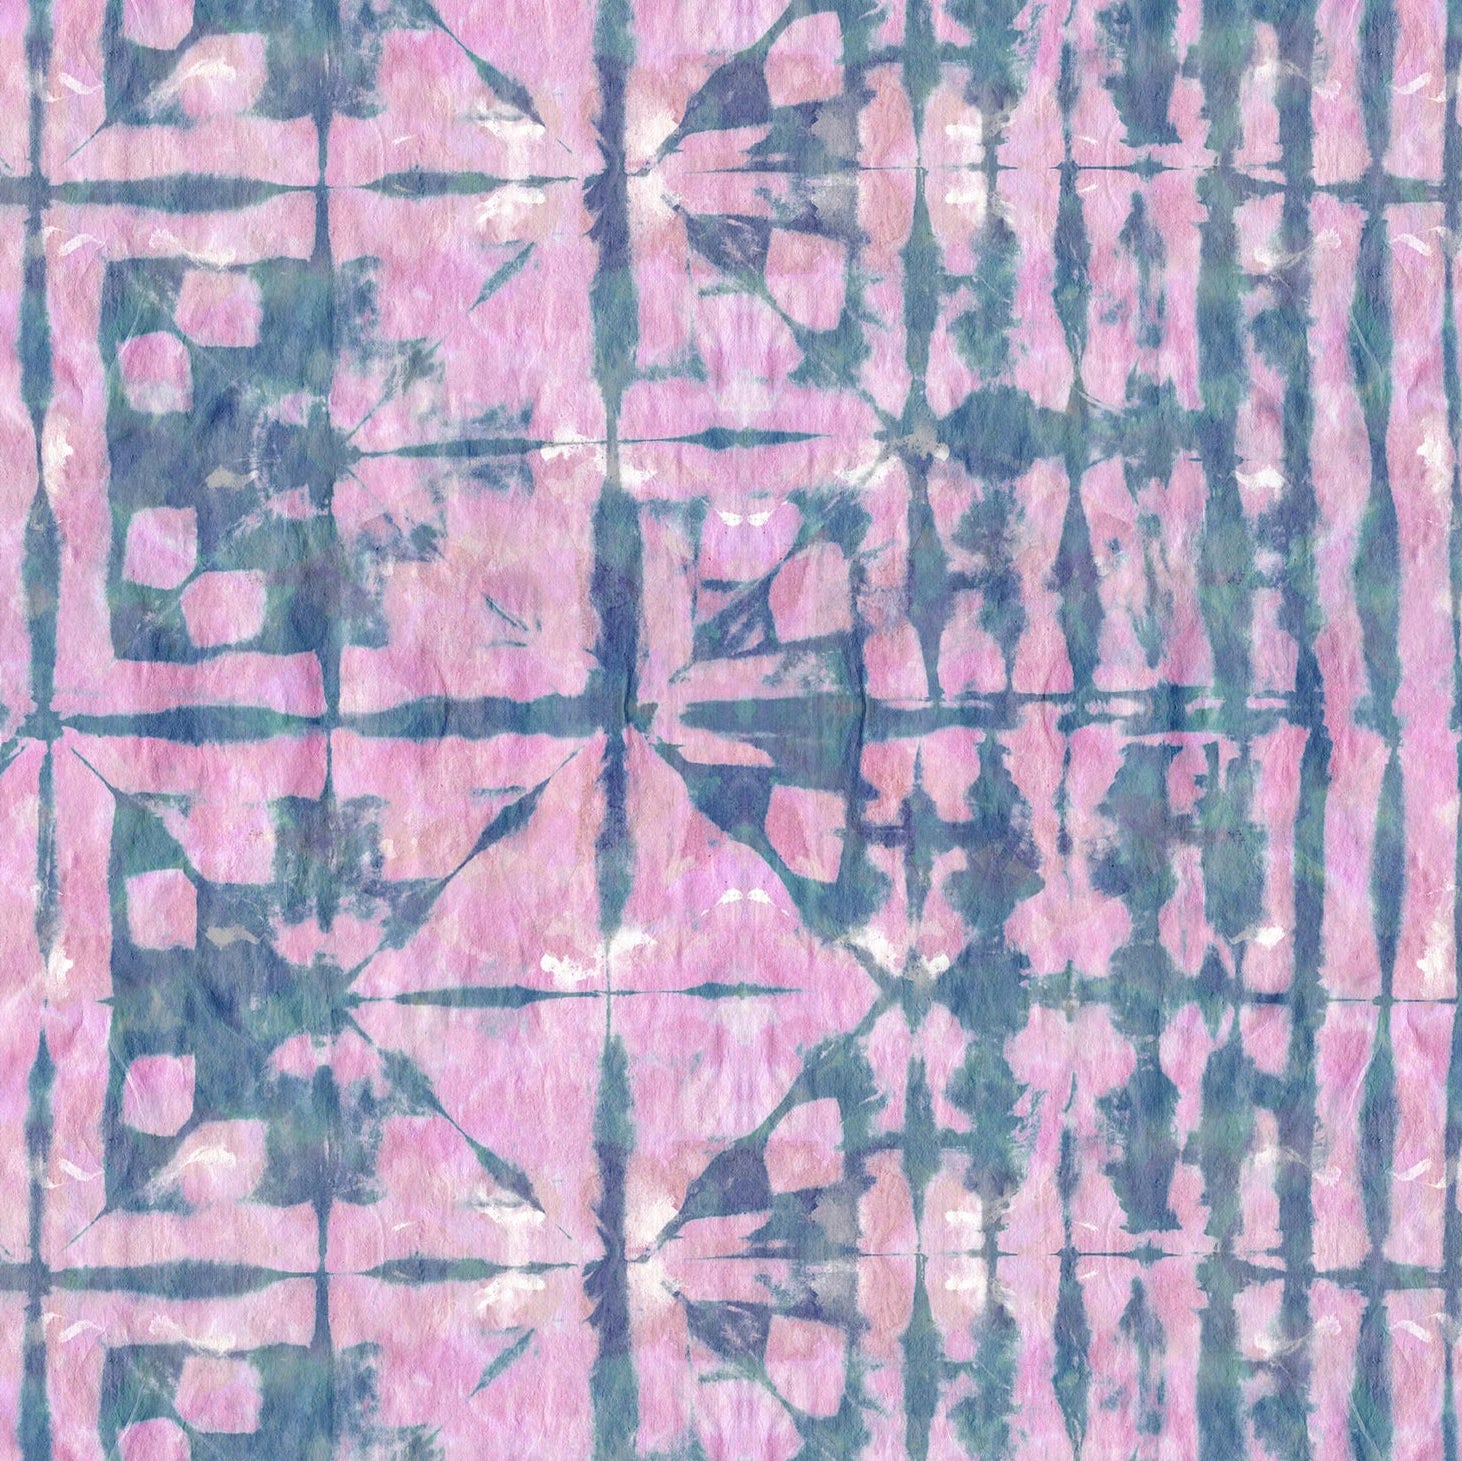 Detail of wallpaper in an abstract dyed grid print in mottled pink and navy.